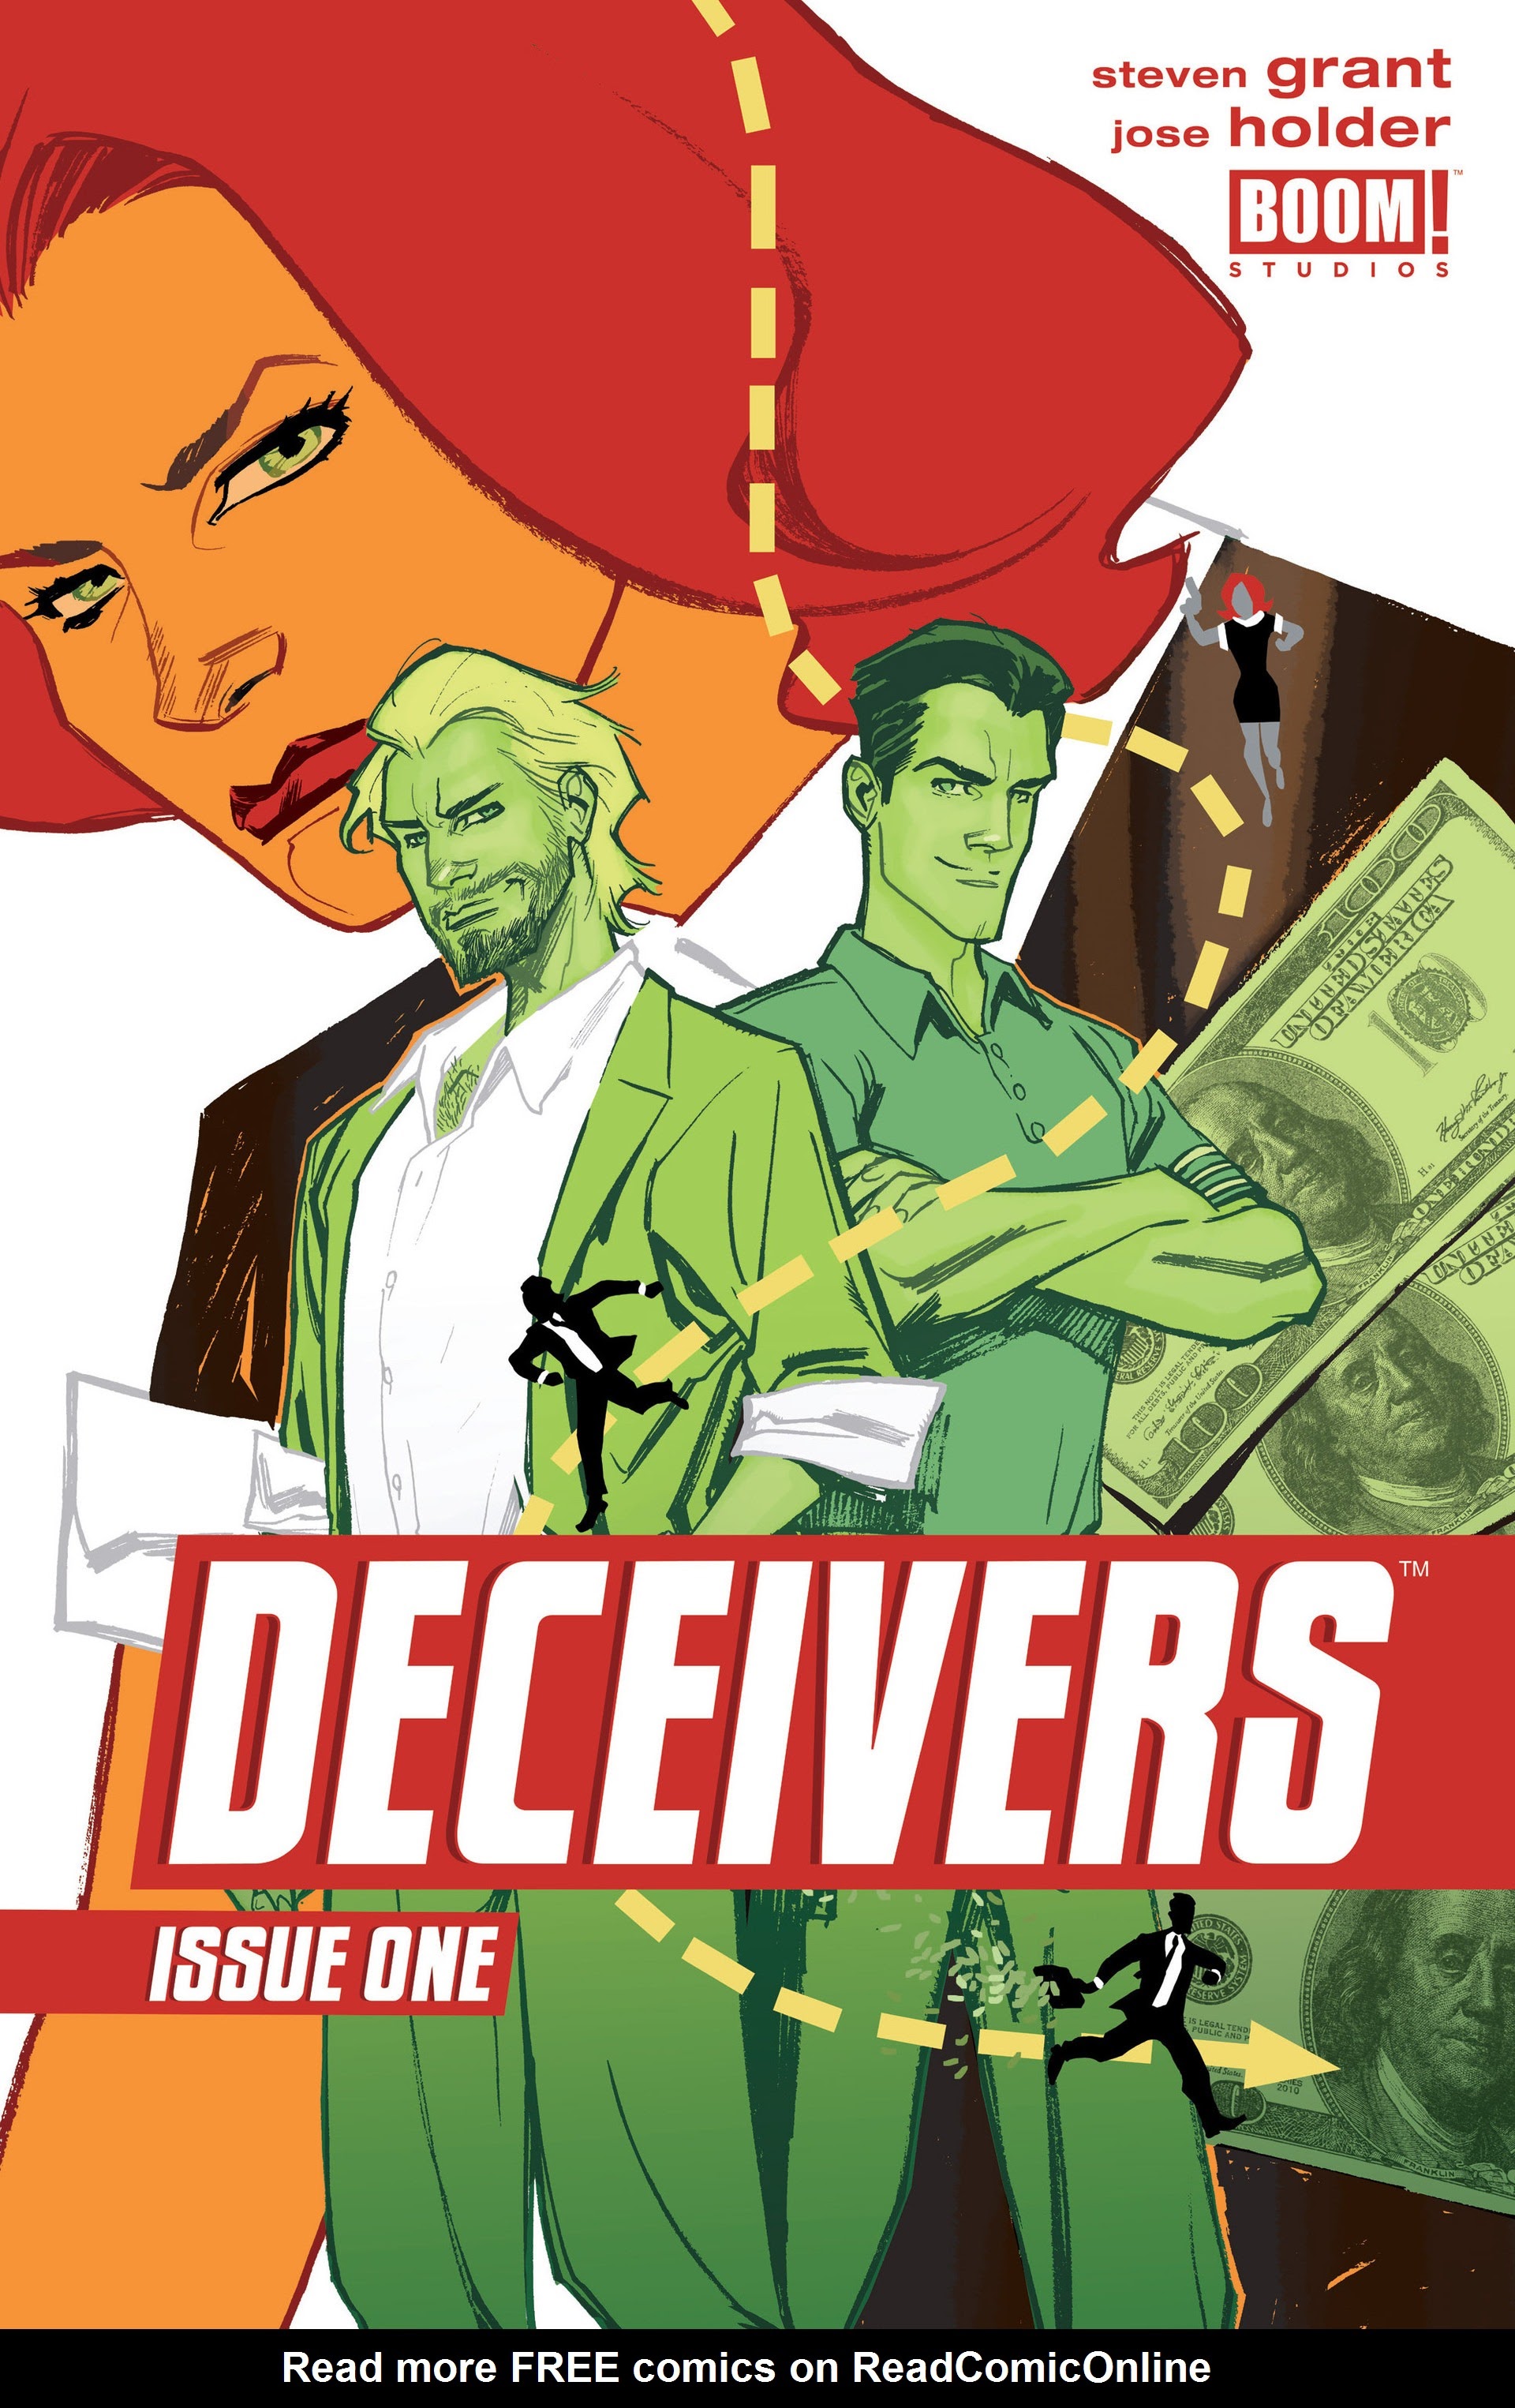 Read online Deceivers comic -  Issue #1 - 1